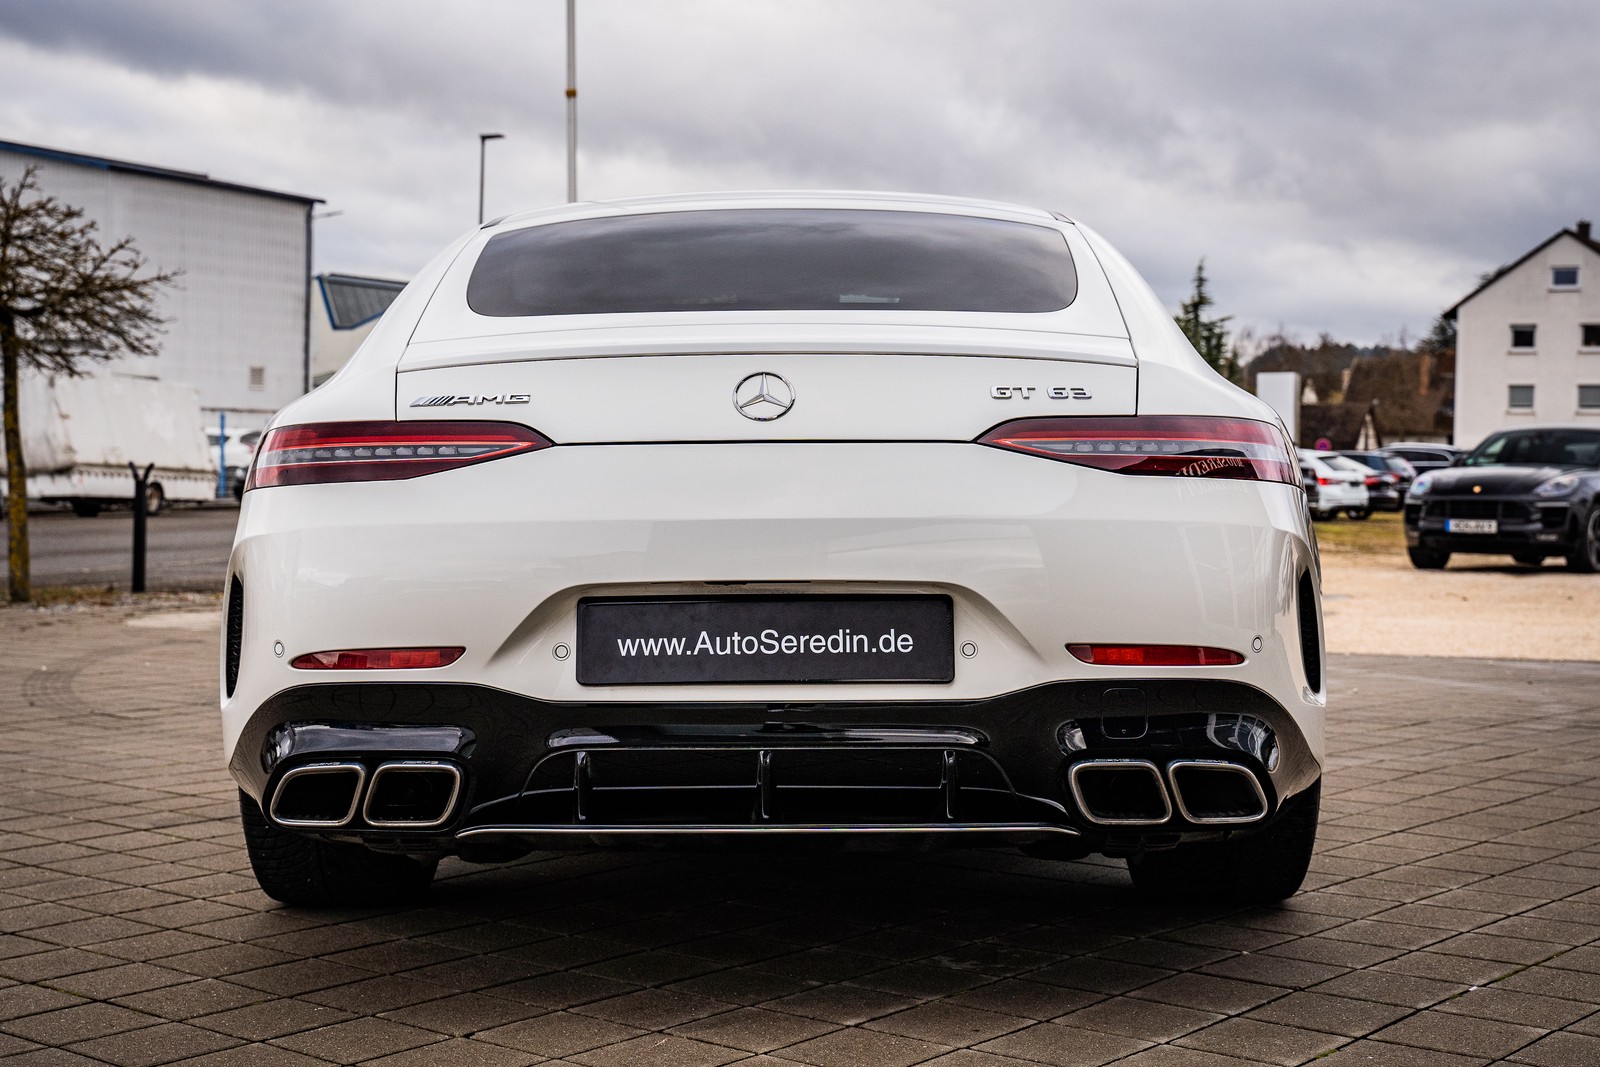 Mercedes-AMG GT 63 4MATIC + - Auto Seredin - Germany - For sale on ...